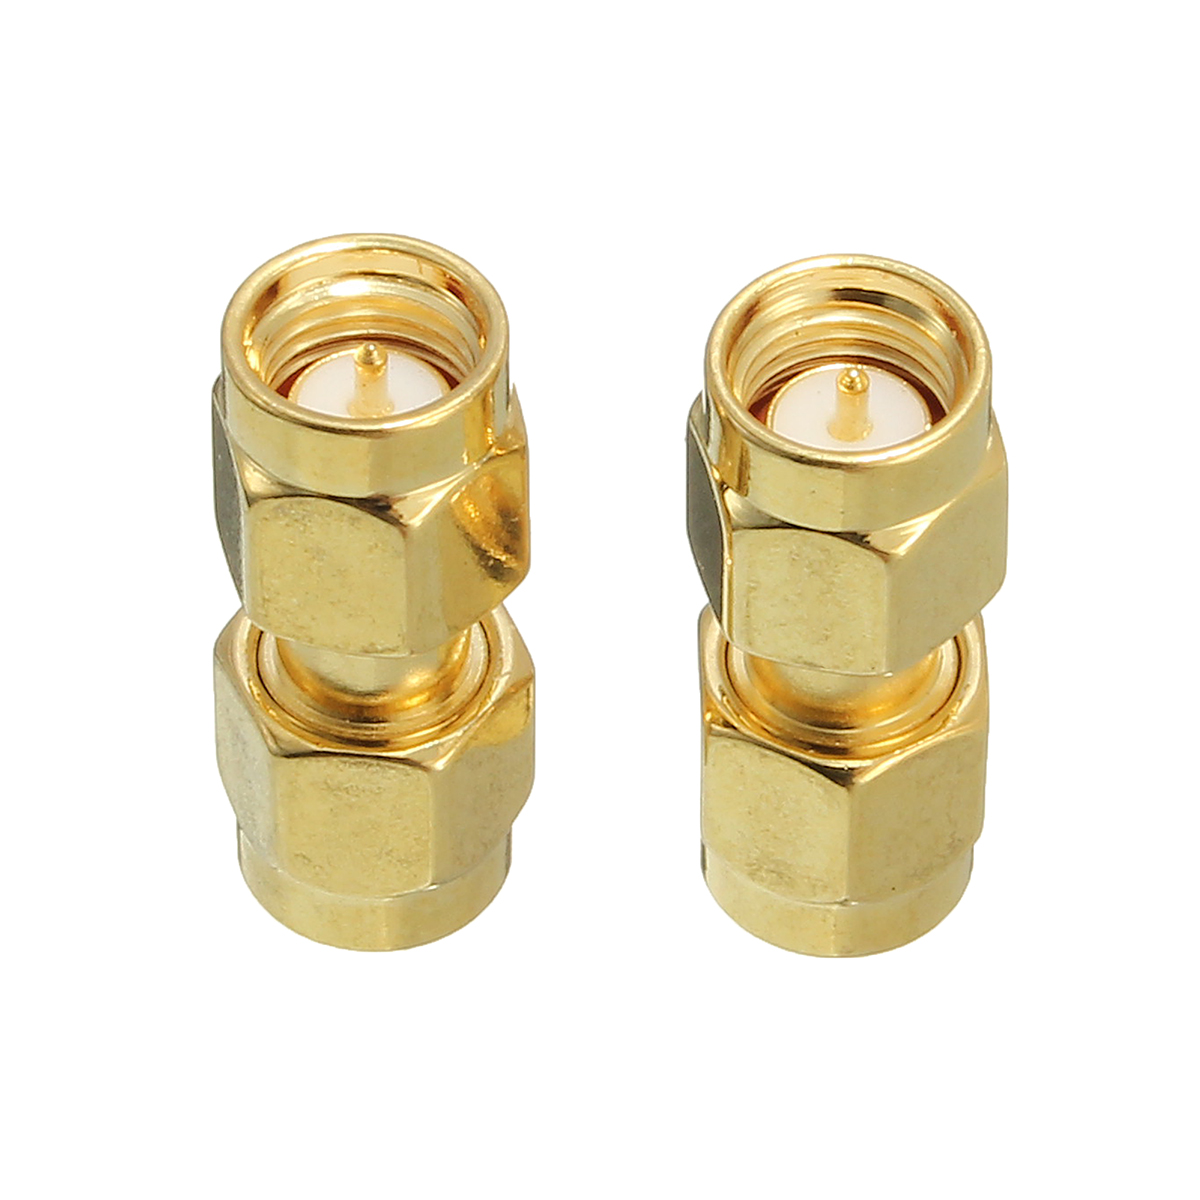 Excellwayreg-CA01-2Pcs-Copper-SMA-Male-To-SMA-Male-Plug-RF-Coaxial-Adapter-Connector-1073343-4